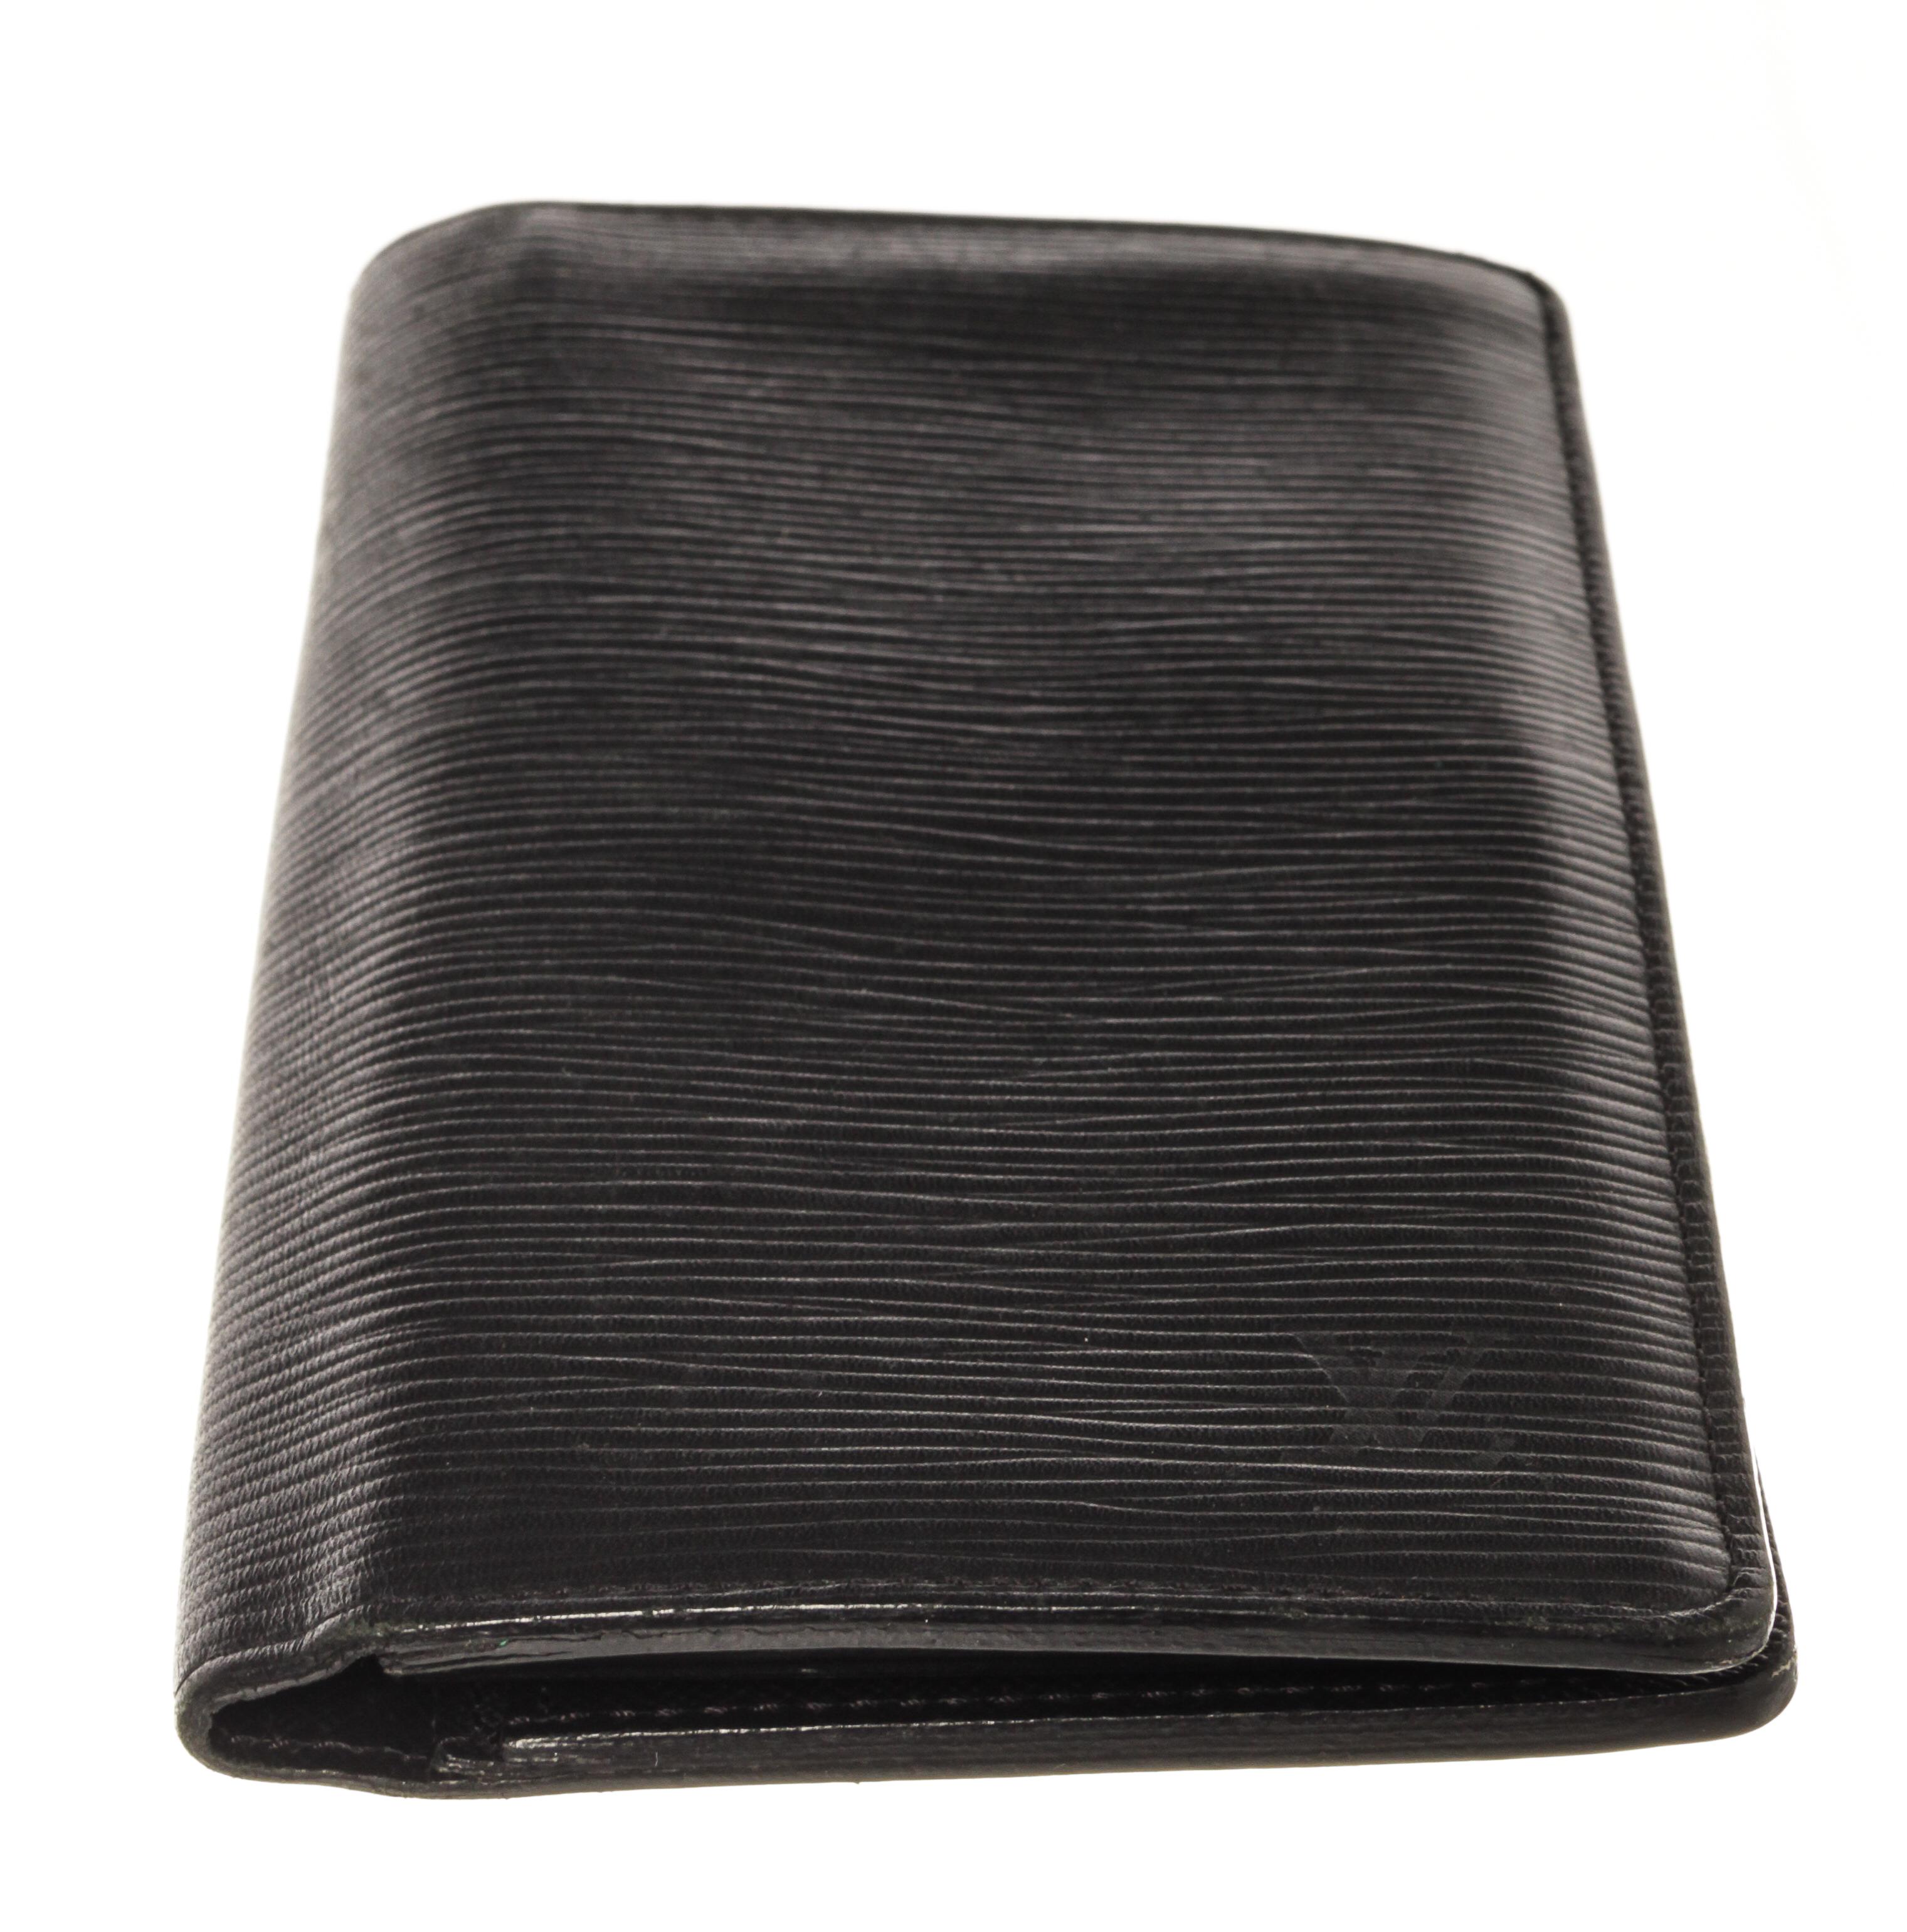 Louis Vuitton Black Epi Leather Brazza Wallet In Good Condition For Sale In Irvine, CA